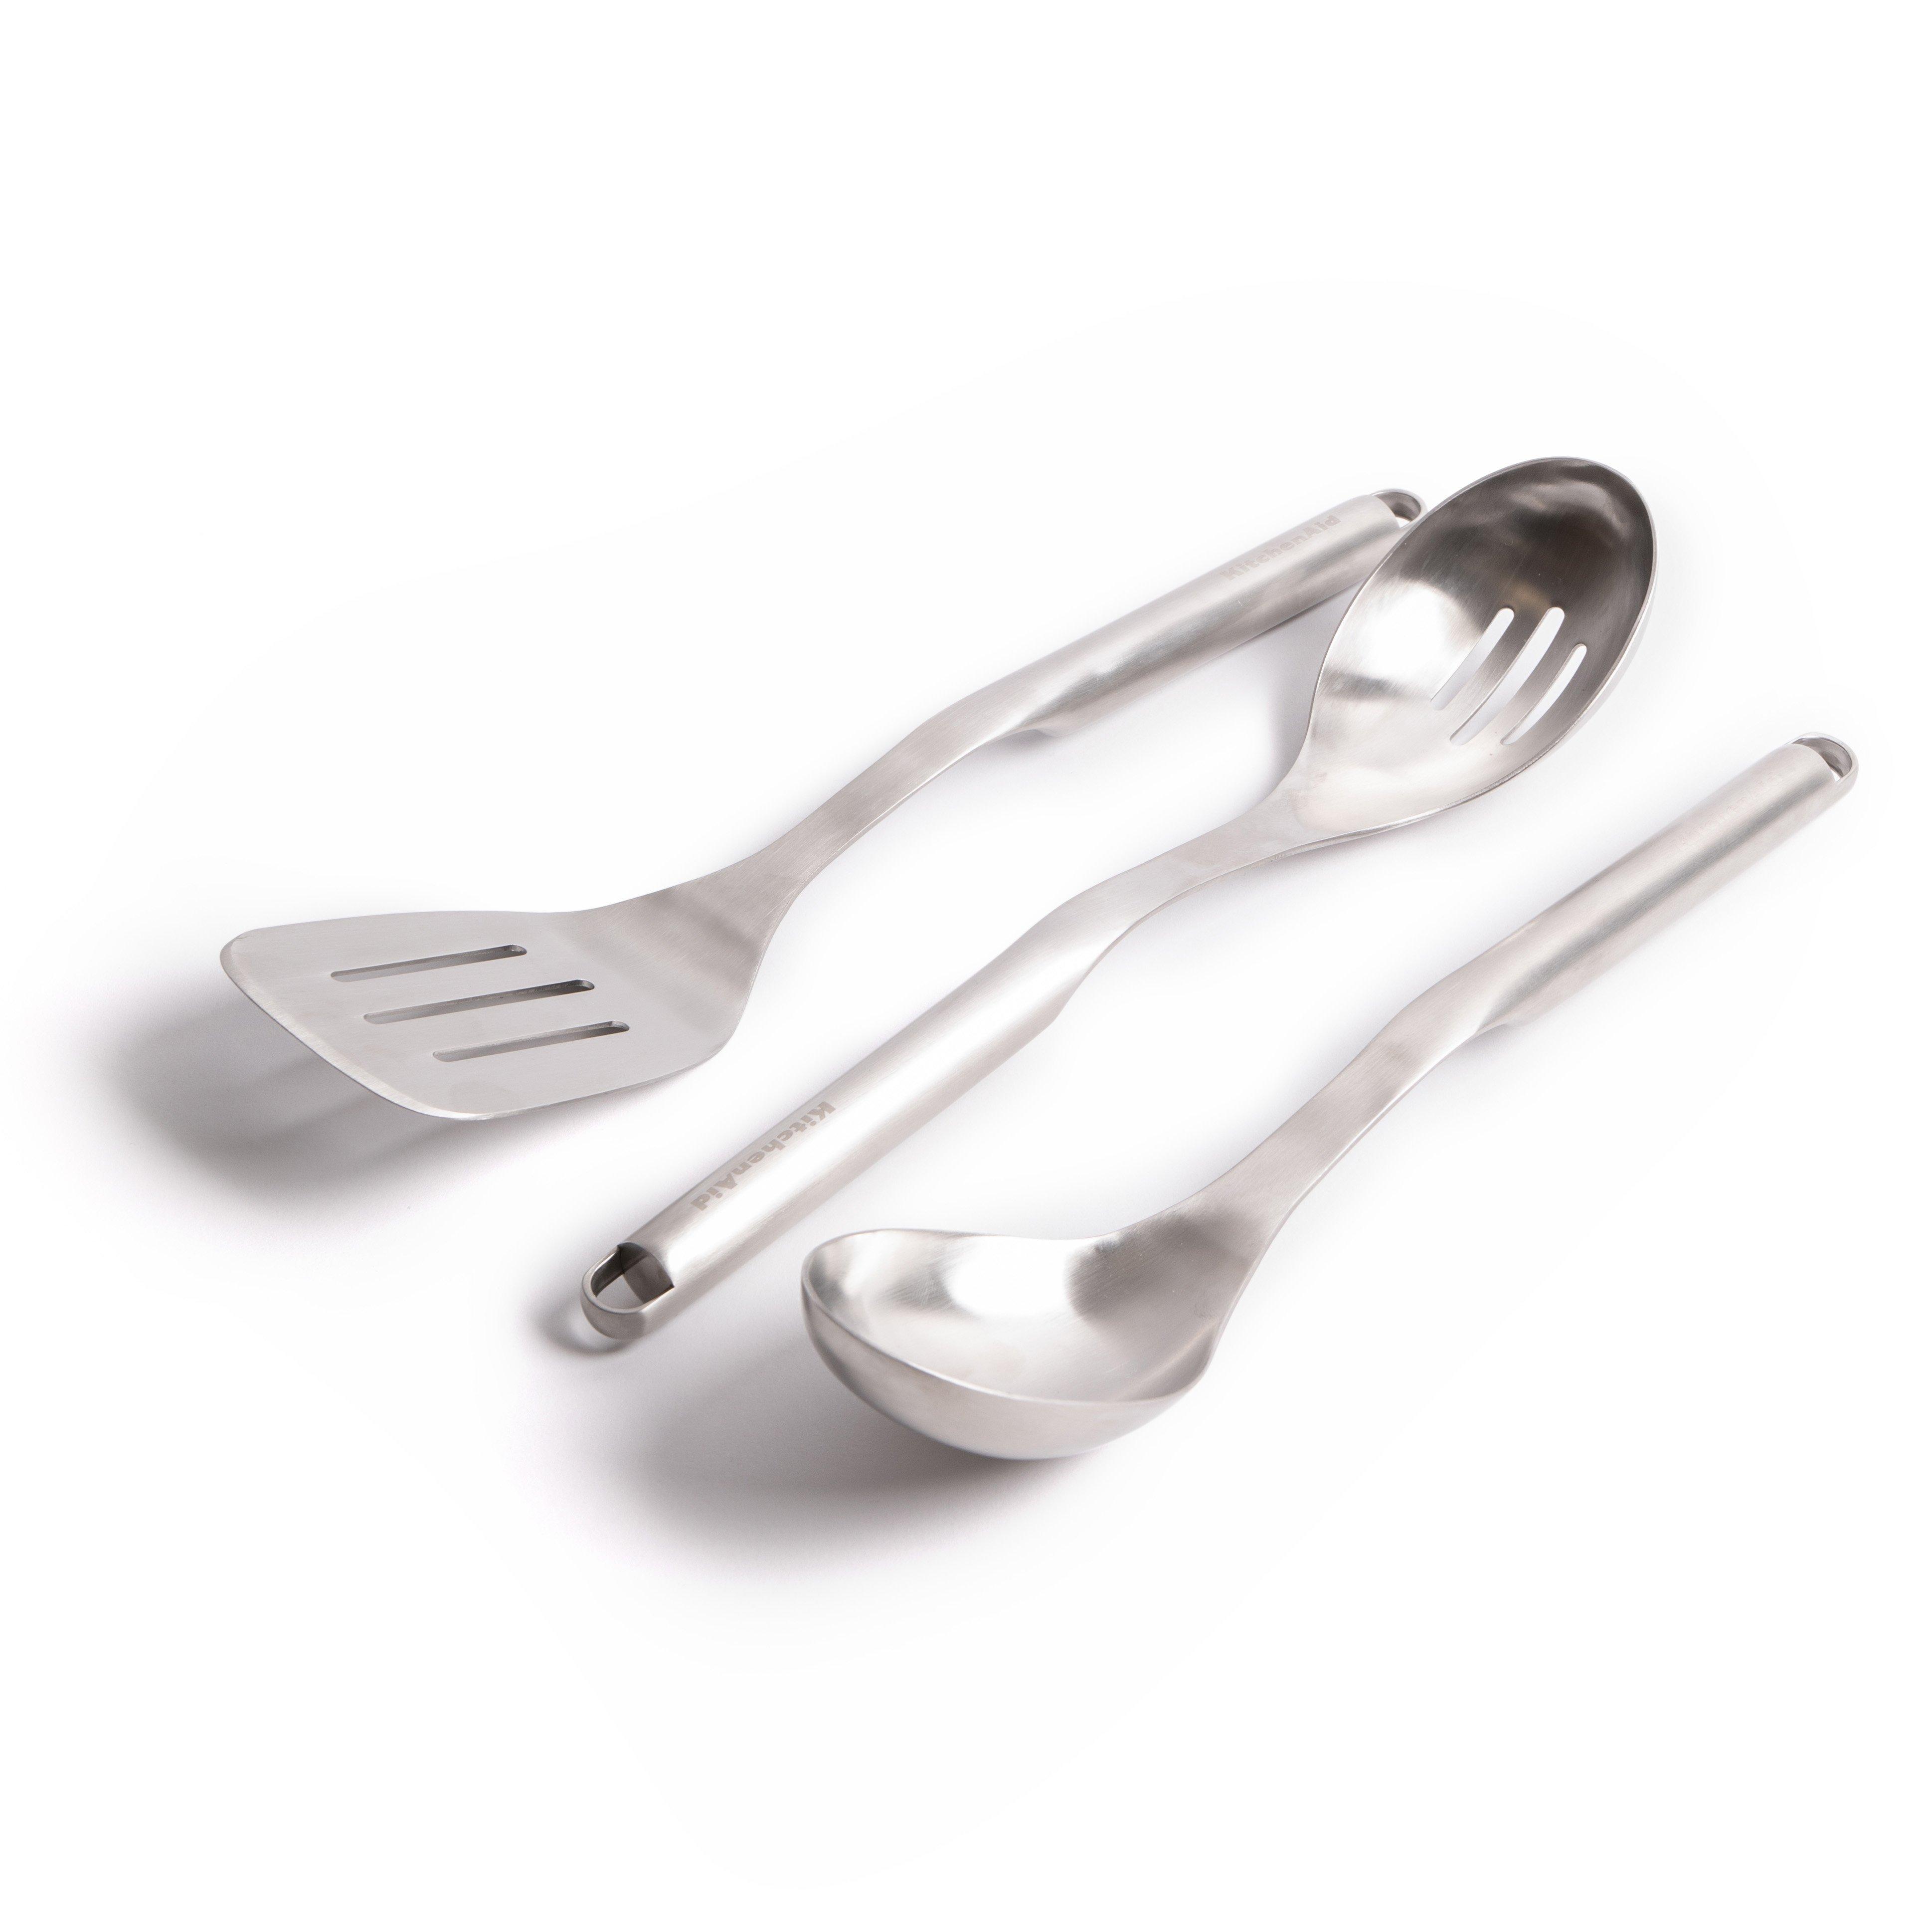 3pc Premium Stainless Steel Utensil Set including Slotted Turner, Slotted Spoon and Cooking Spoon